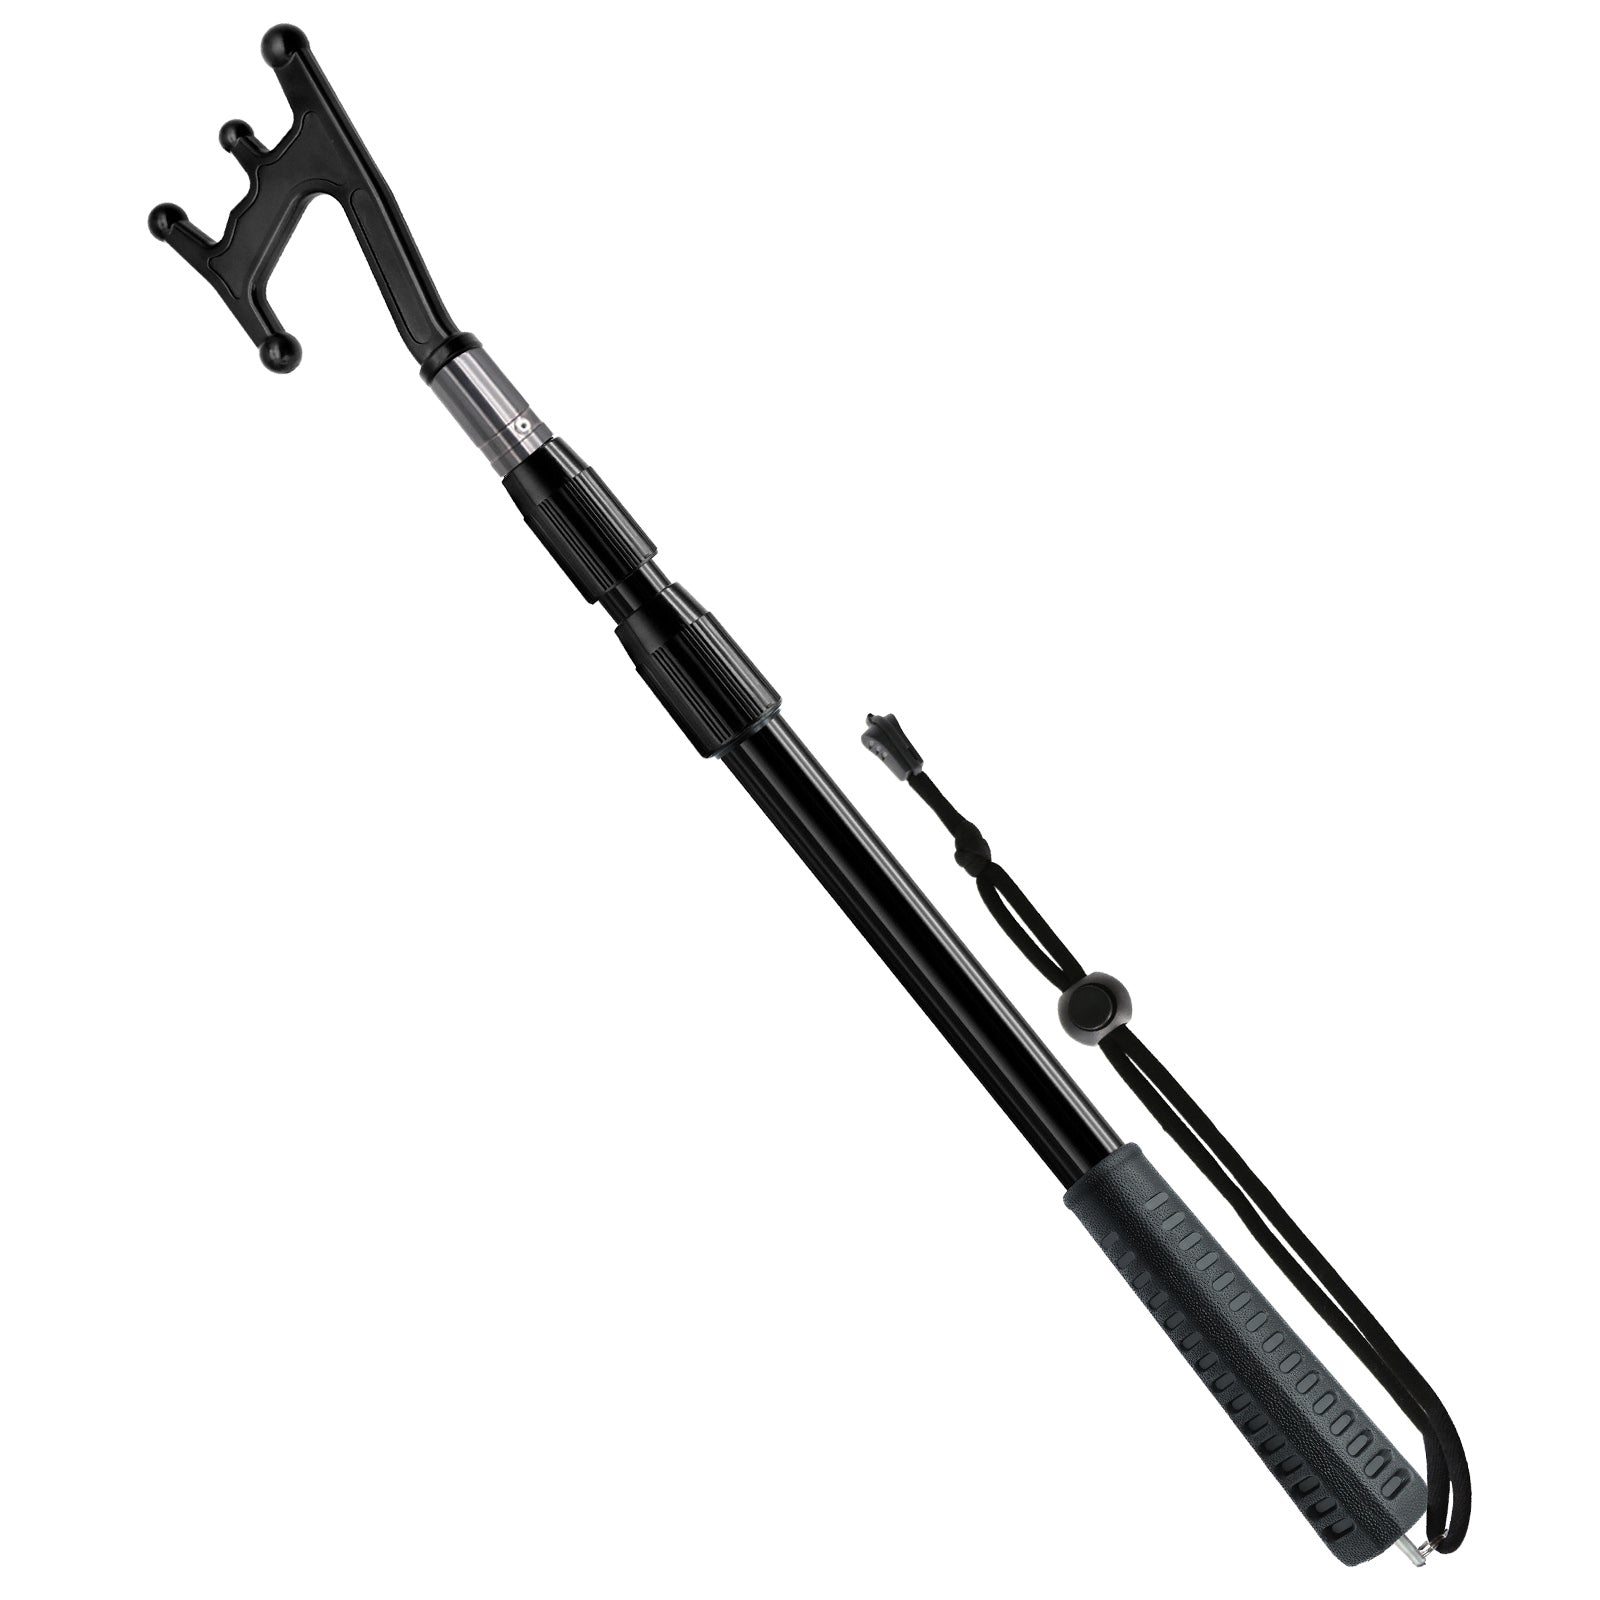 Besramtic Boat Hook Pole for Docking Telescoping from 47.2 Inches